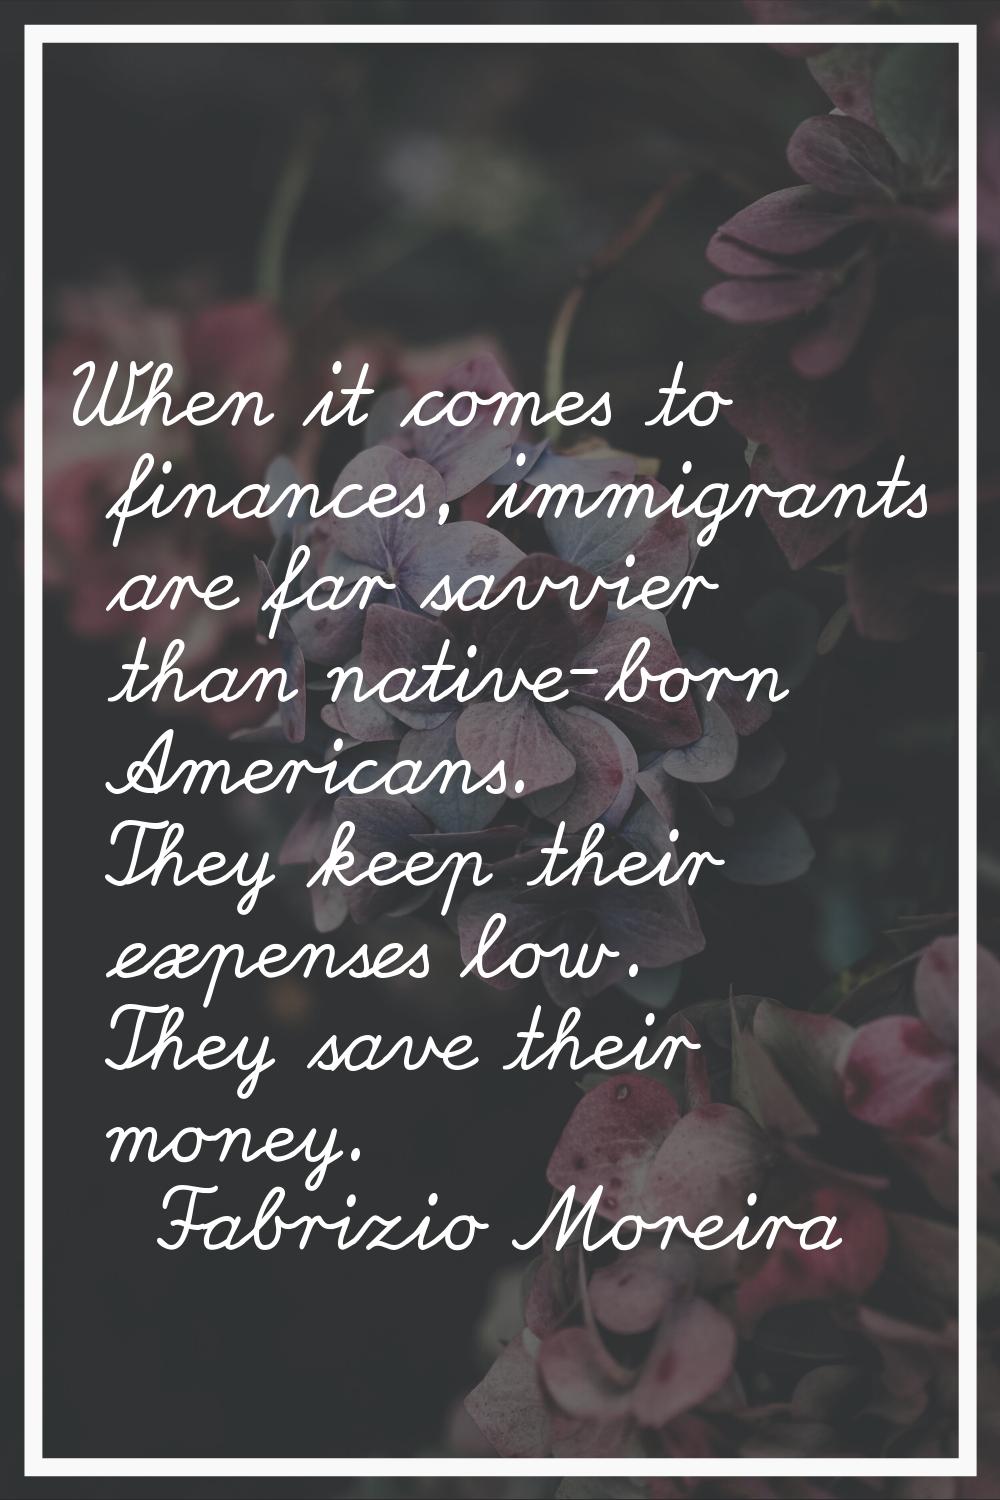 When it comes to finances, immigrants are far savvier than native-born Americans. They keep their e